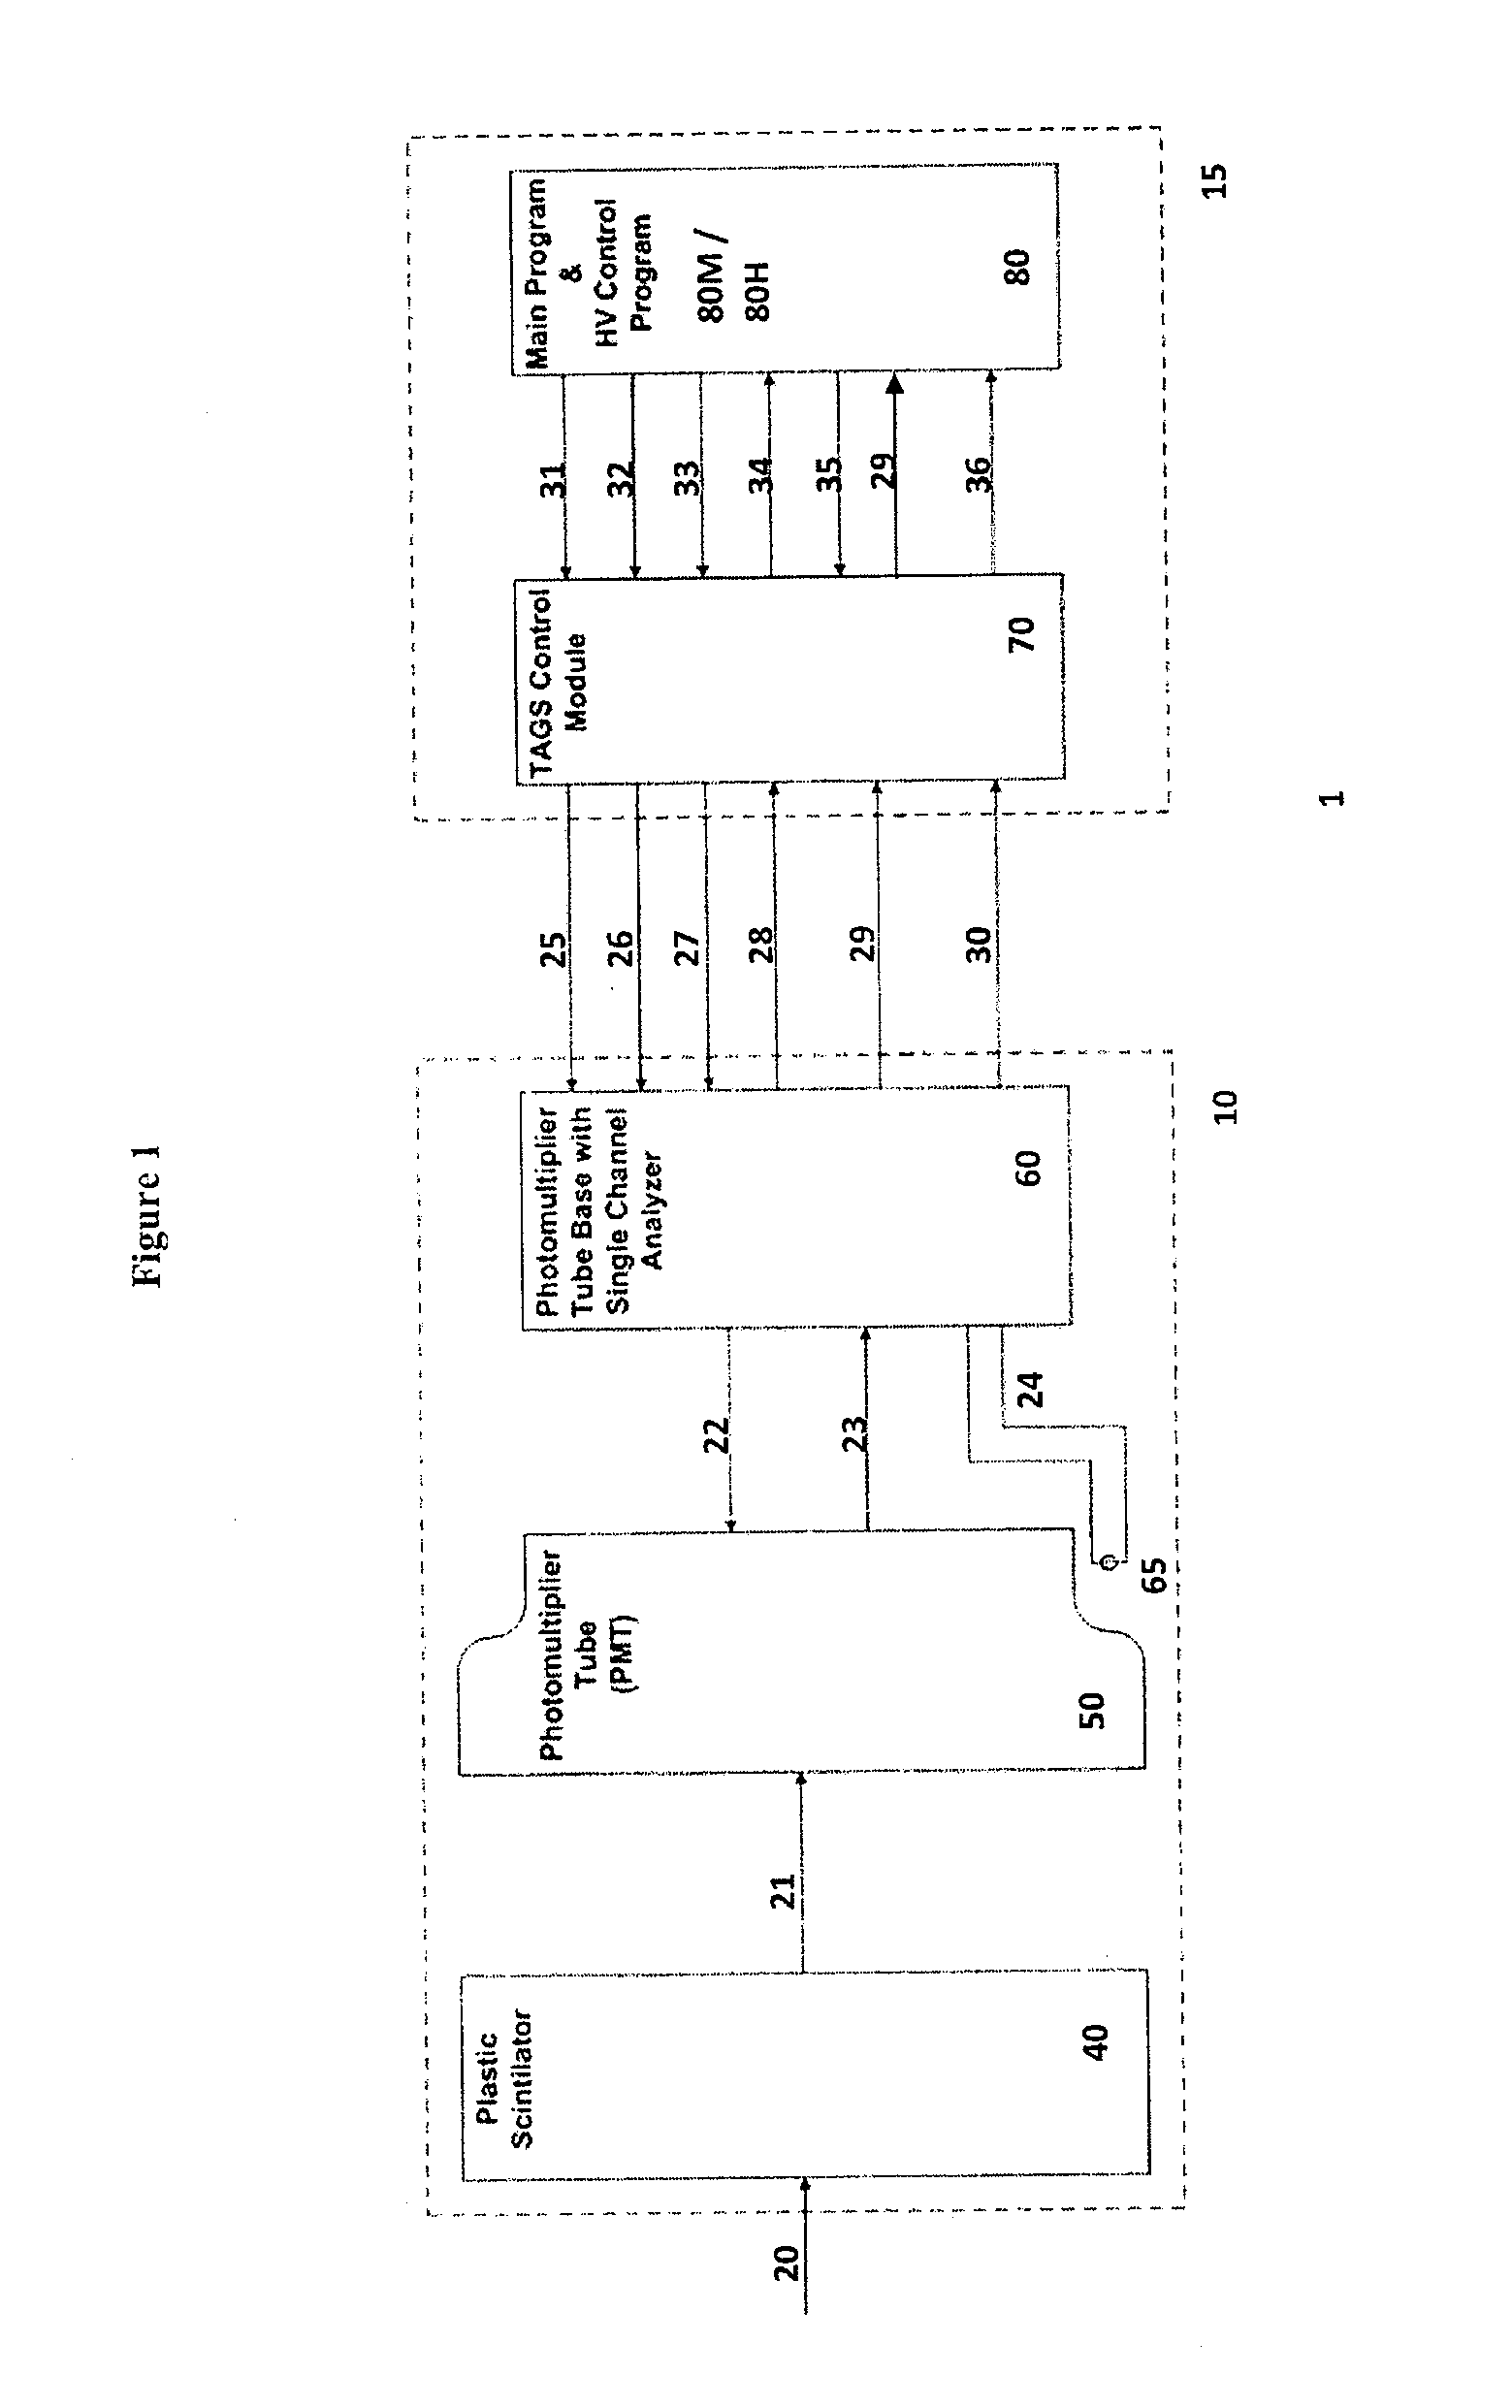 Analog signal measurement system and gamma ray detector with targeted automated gamma spectroscopy